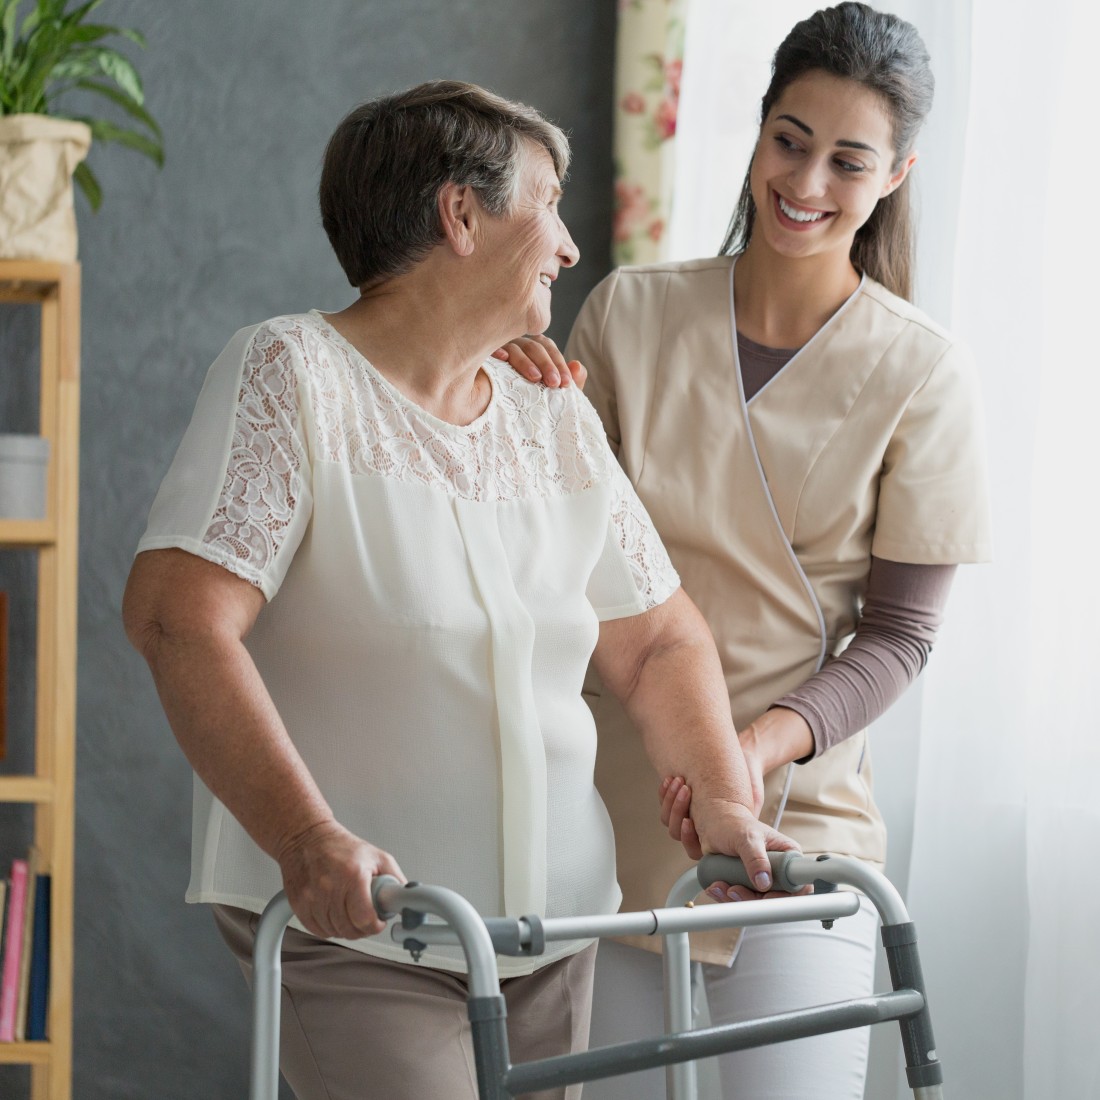 Home Care Services | ComForCare | Dayton, OH - CFC18